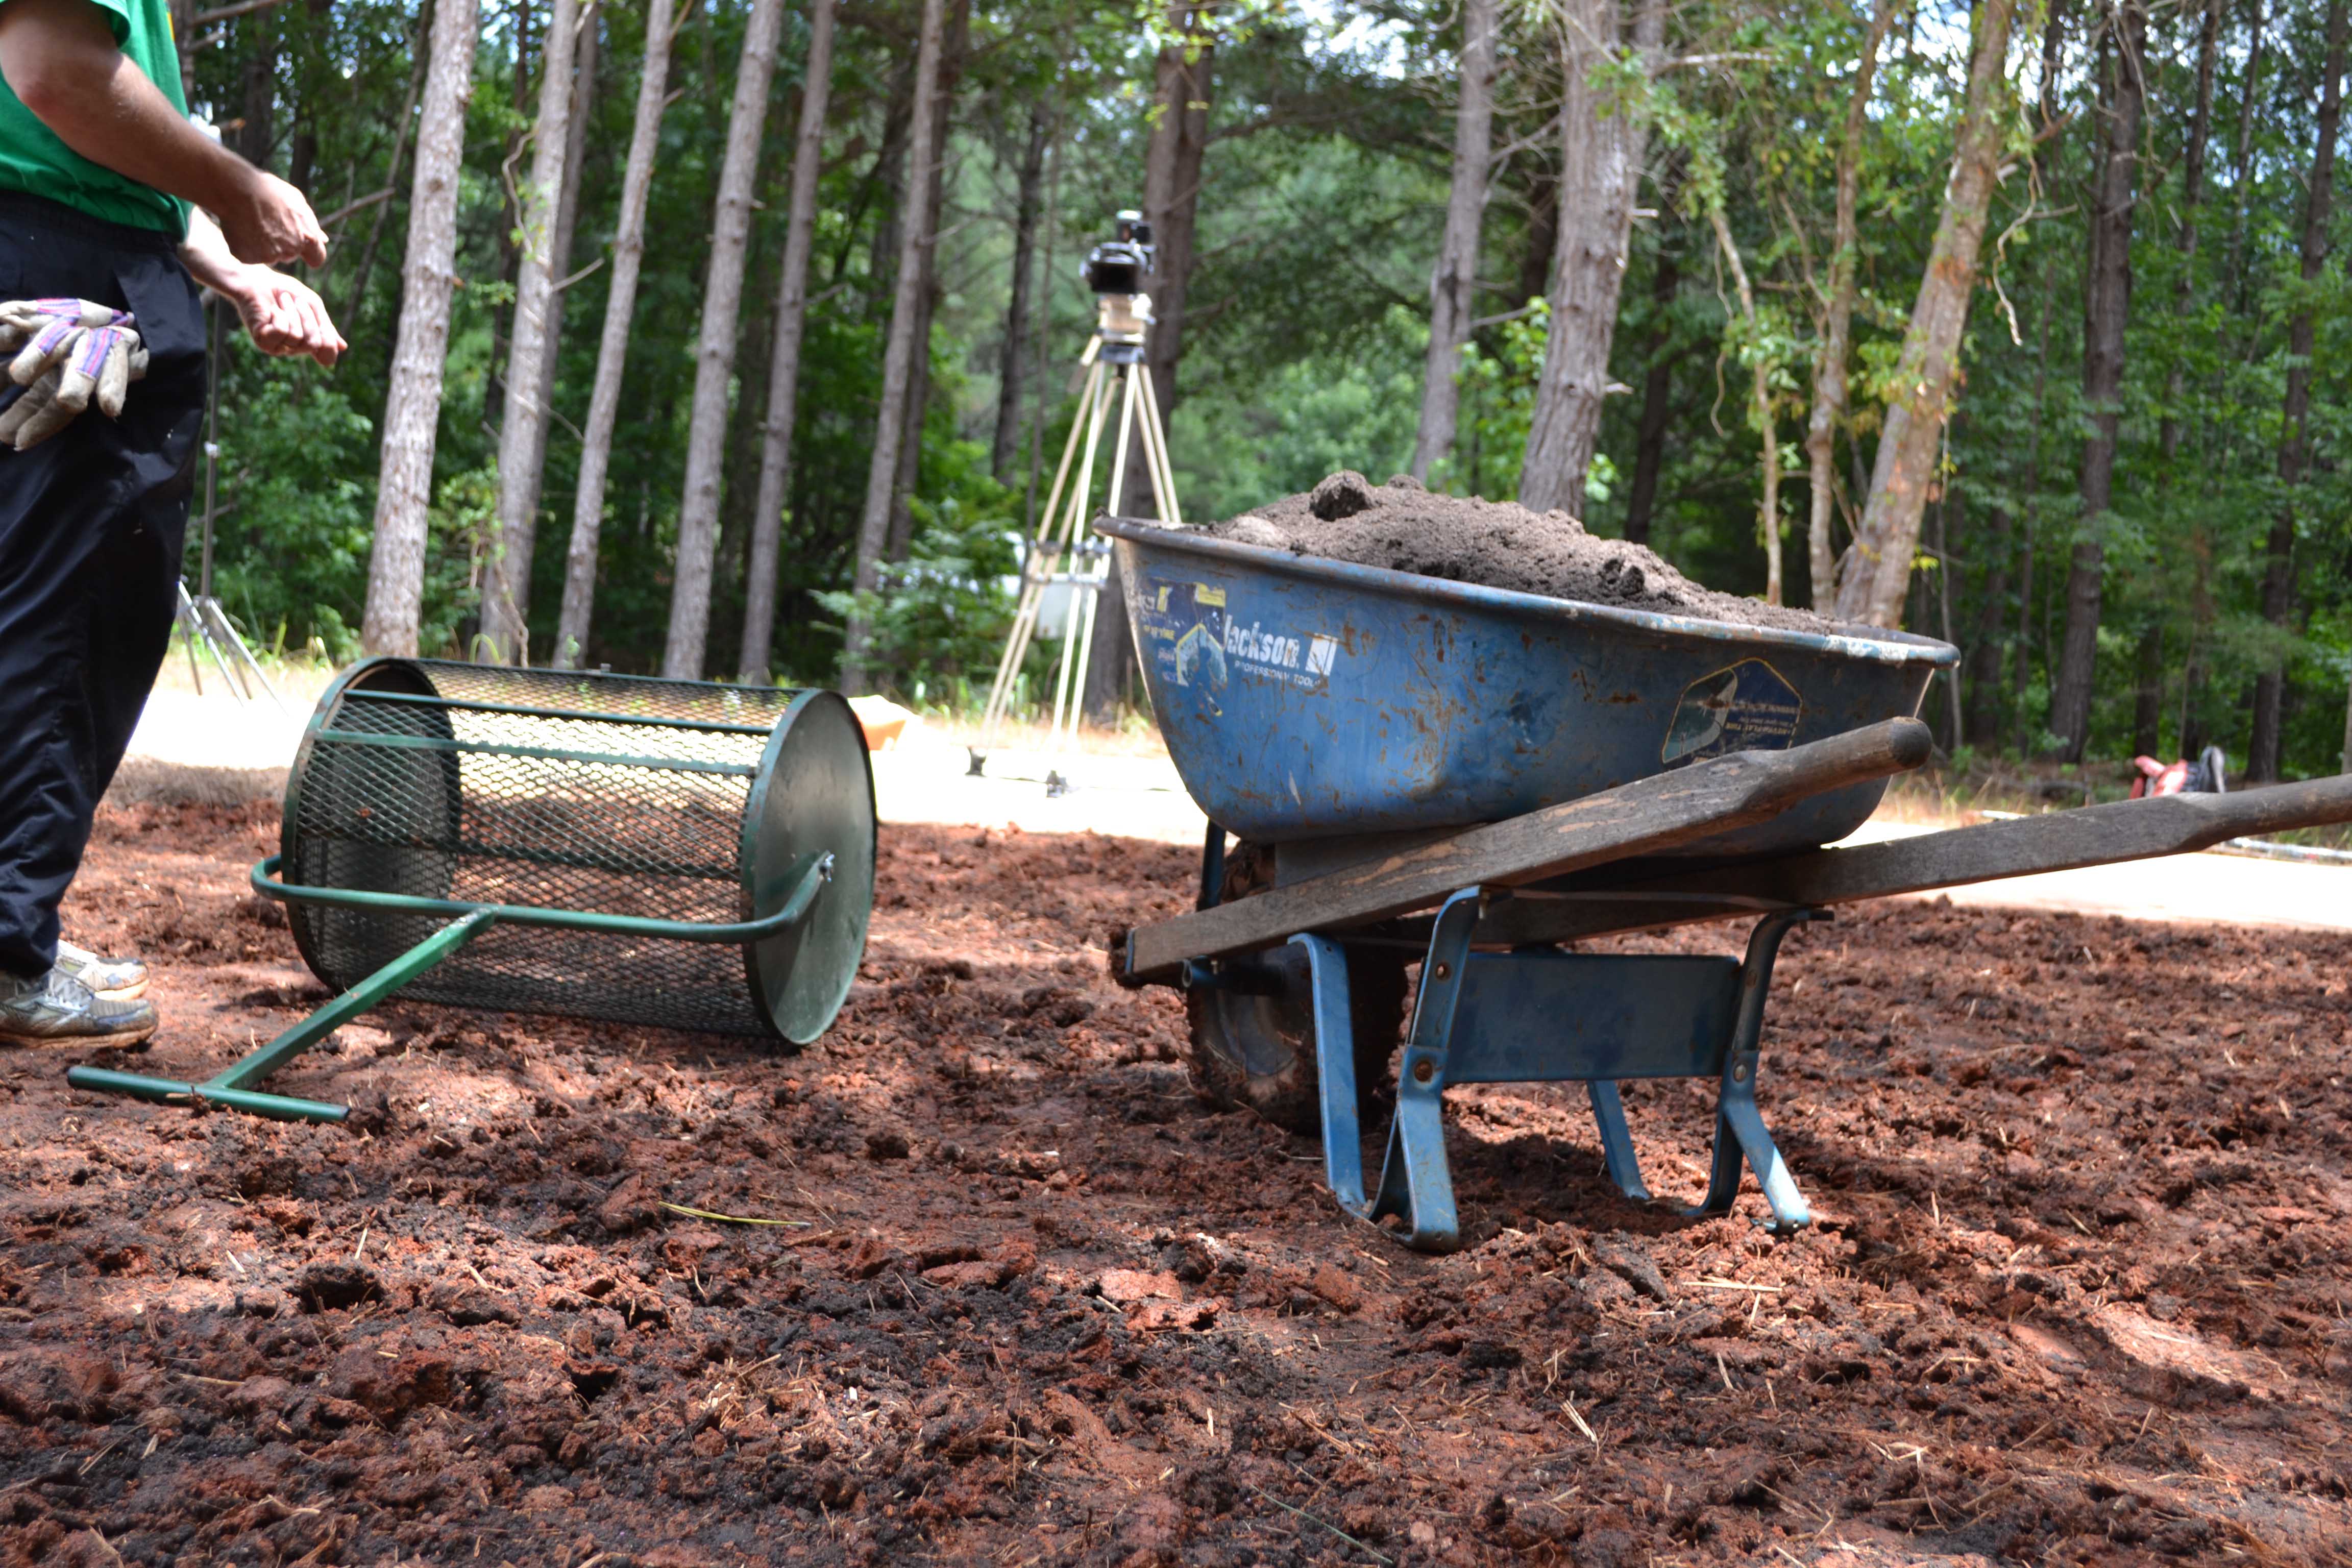 Compost spreading equipment and filming equipment were both involved in the making of this TifBlair Centipede video.